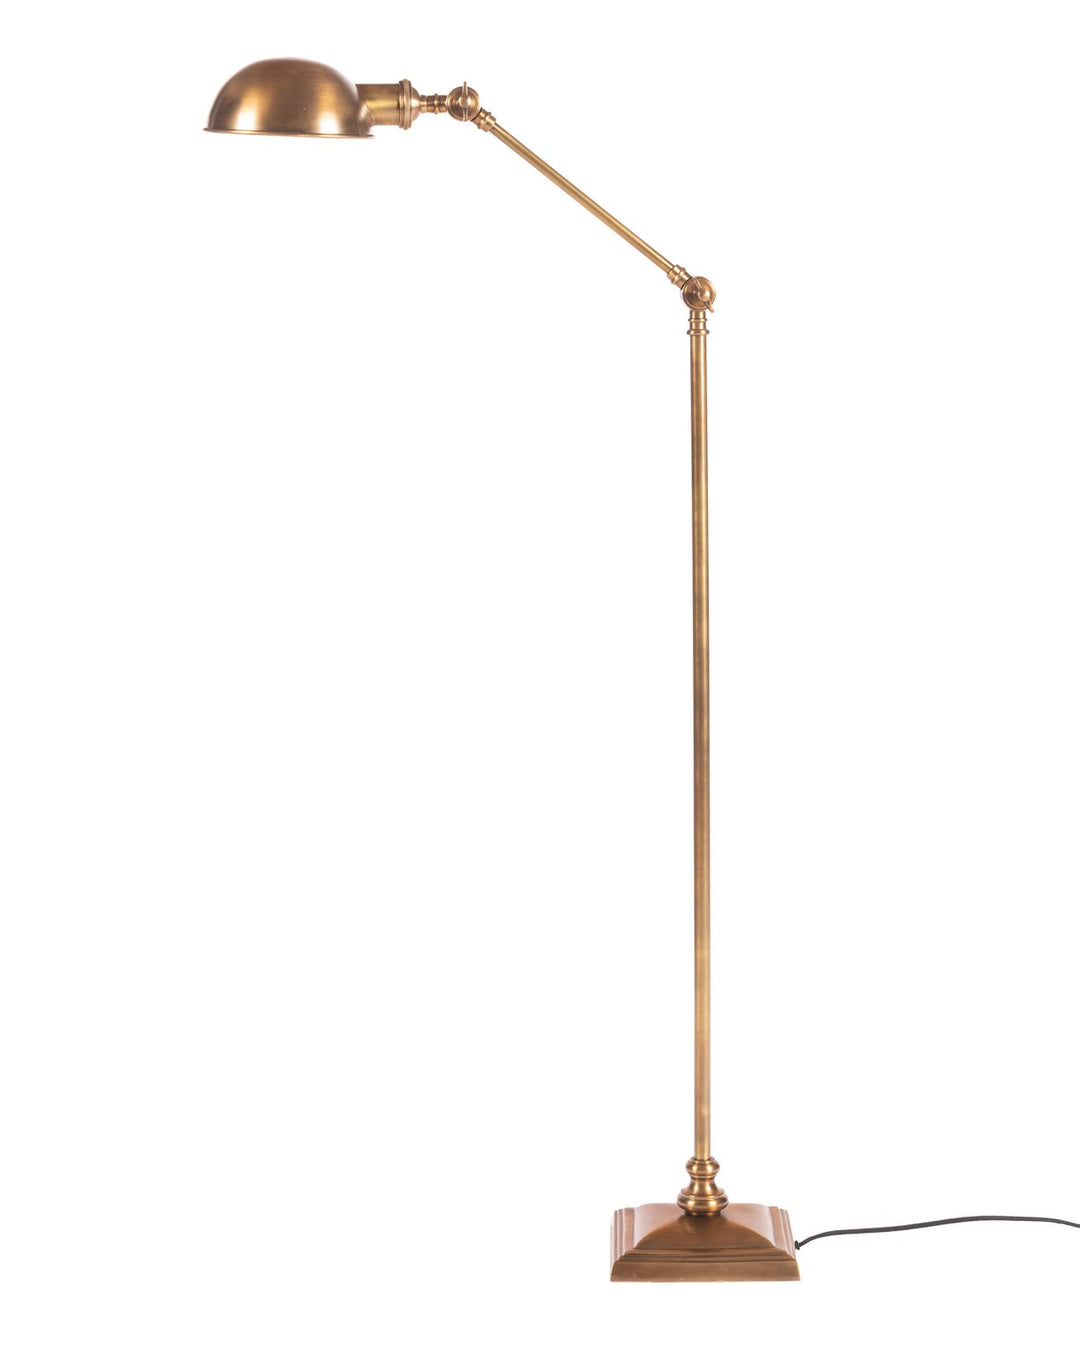 Mind-the-gap-Jefferson-jointed-reading-lamp-base-lighting-brass-floor-light-dome-shade-classic